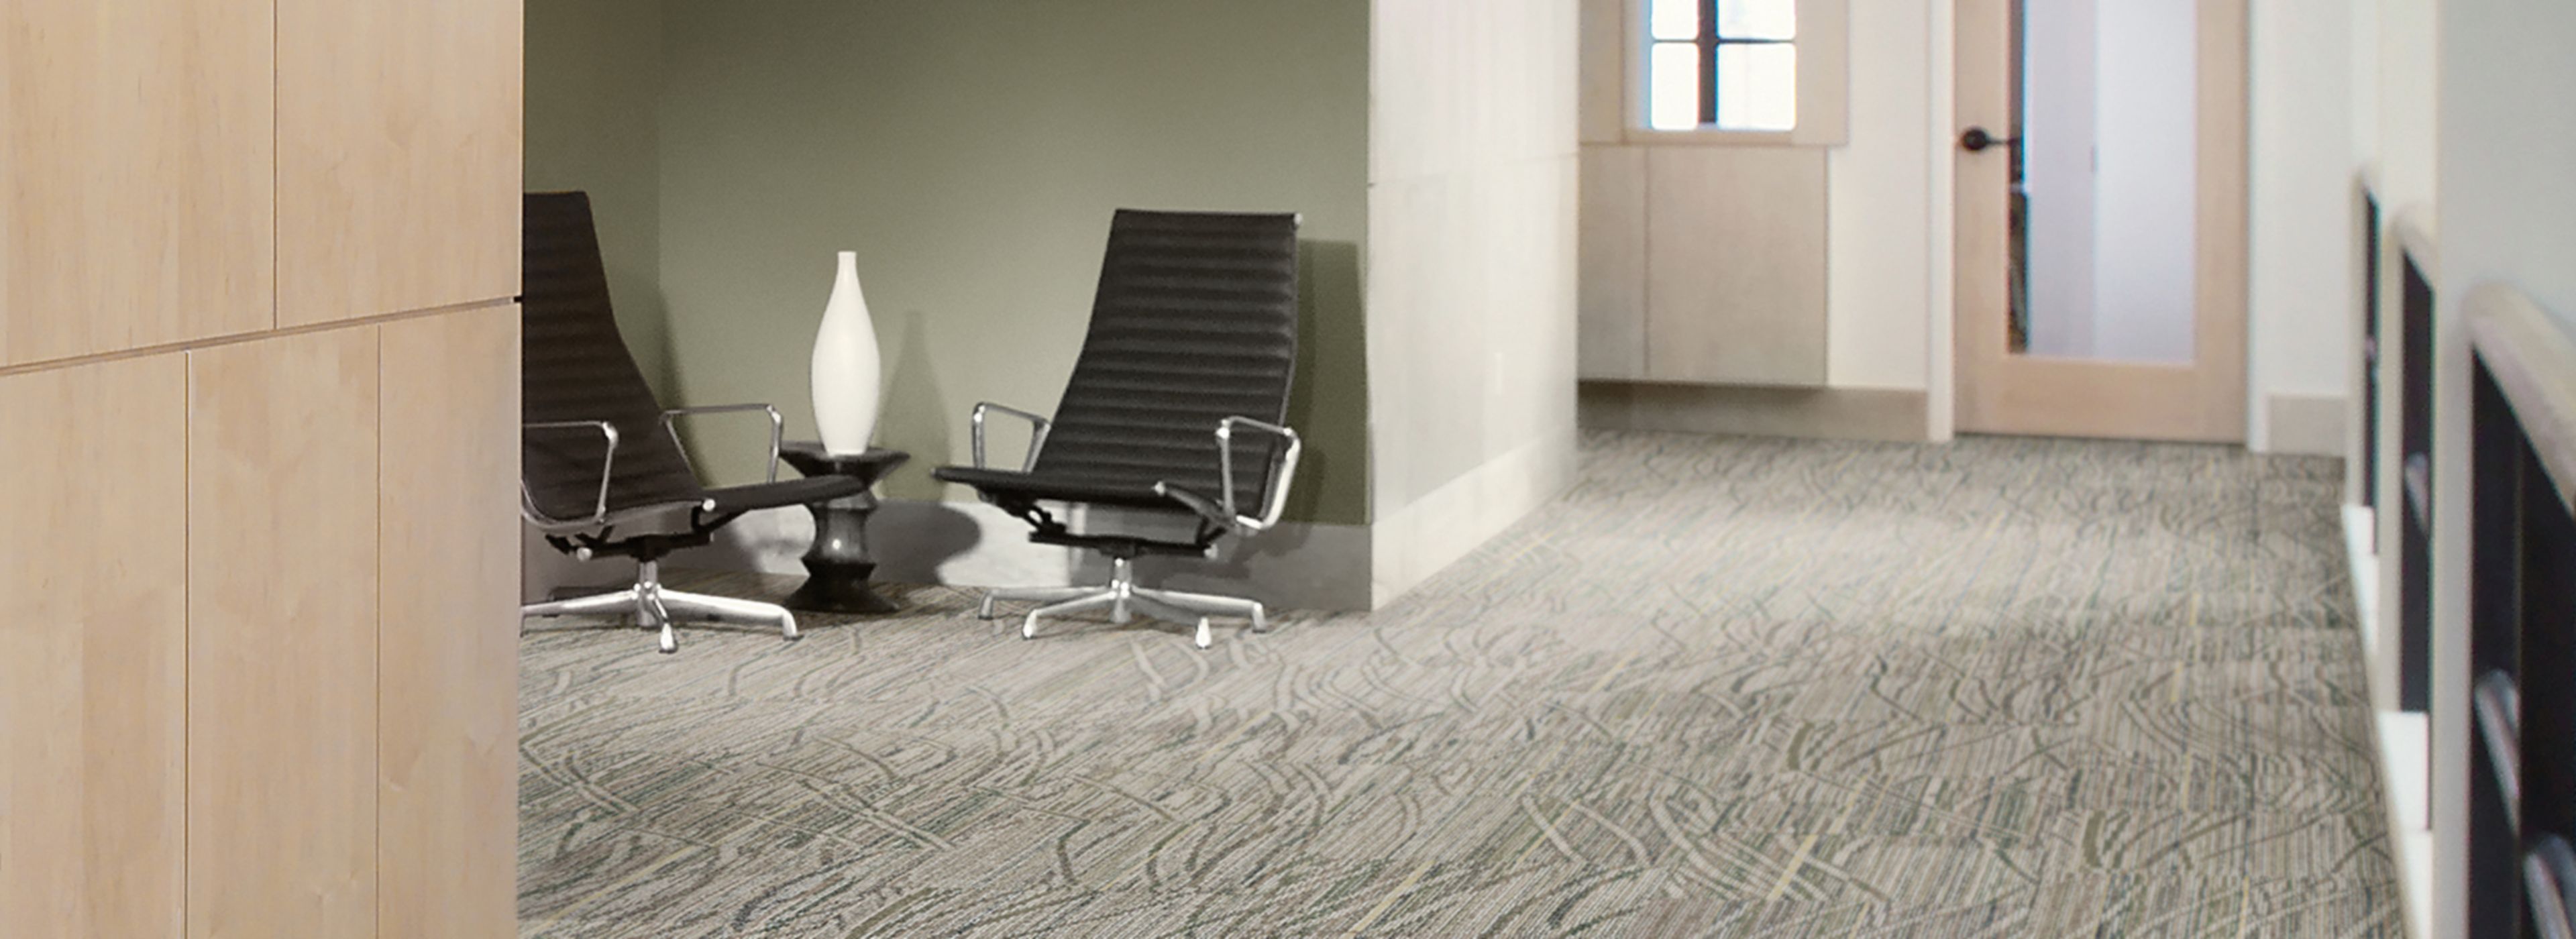 Interface Prairie Grass Loop carpet tile in corridor with seating area on side image number 1